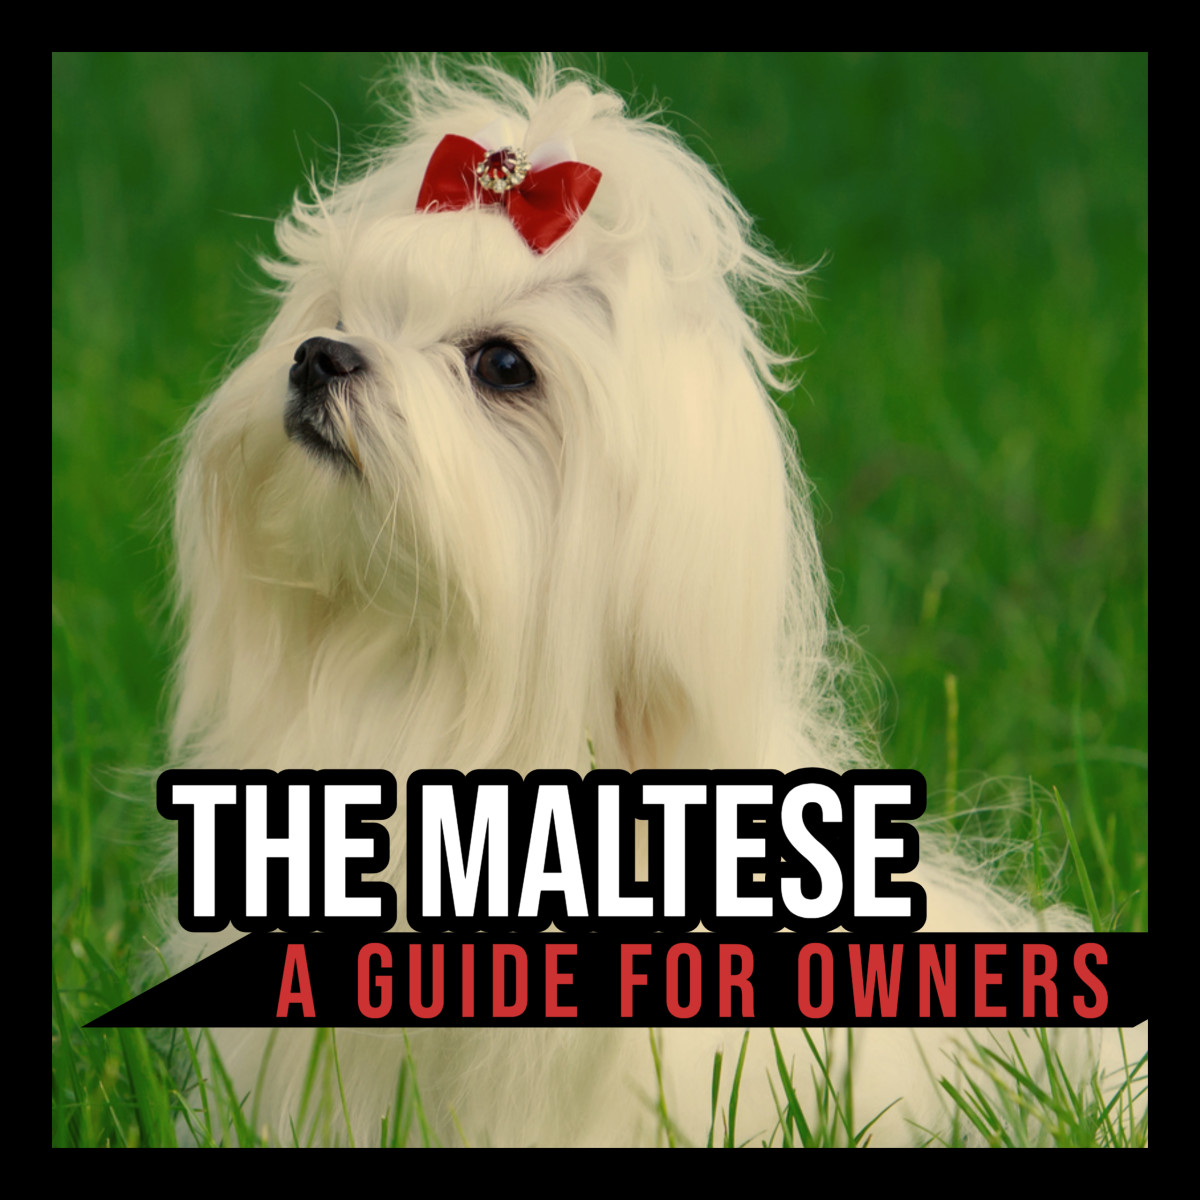 The Maltese: A Guide for Owners